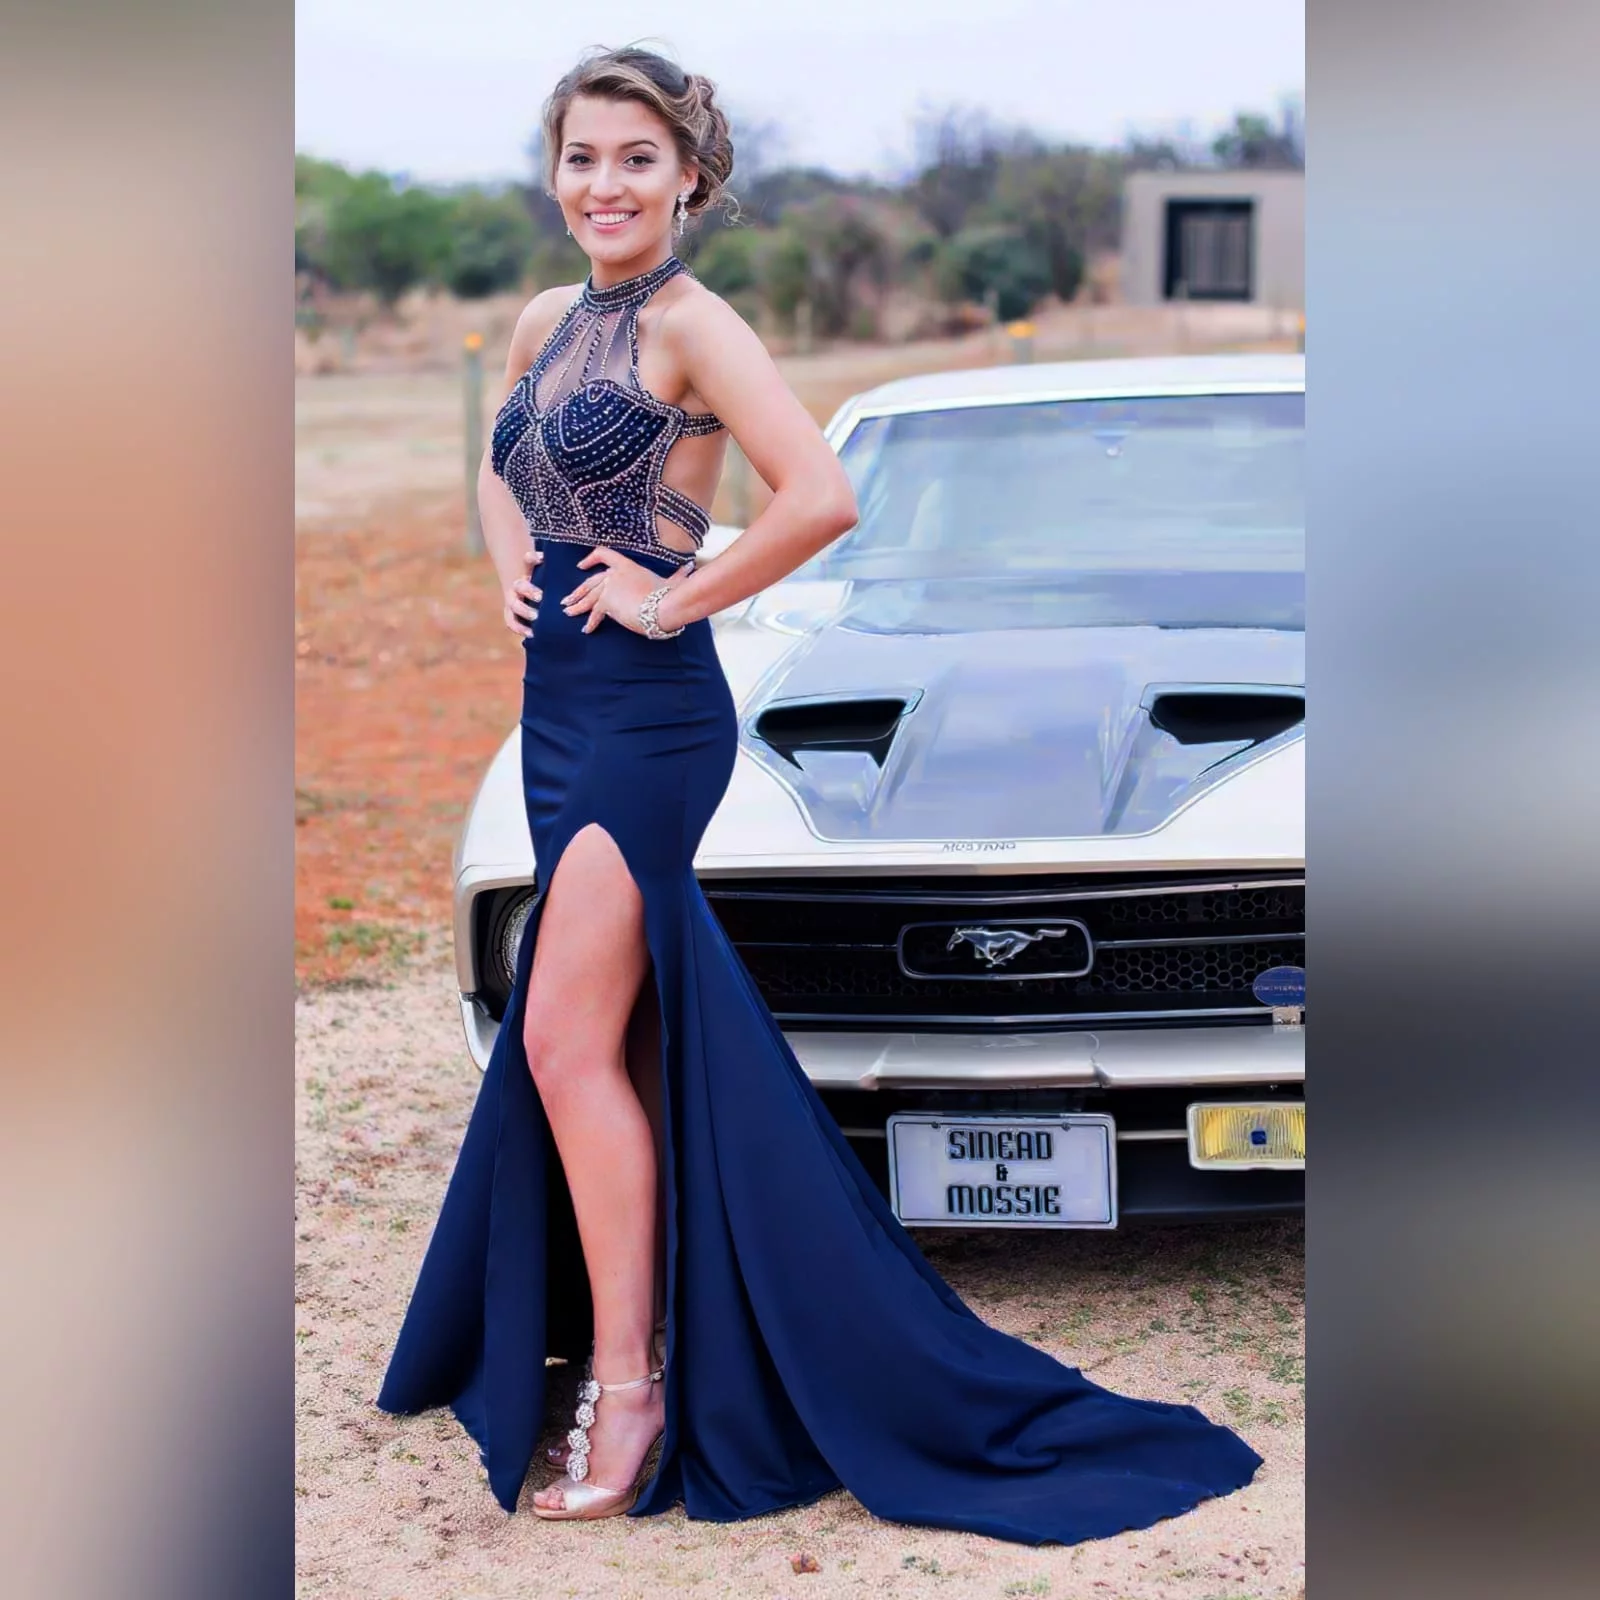 Navy blue silver beaded prom dress 1 navy blue silver beaded prom dress with an illusion neckline and a choker effect. Backless design detailed with beaded straps. Fitted bottom with a slit and a train.